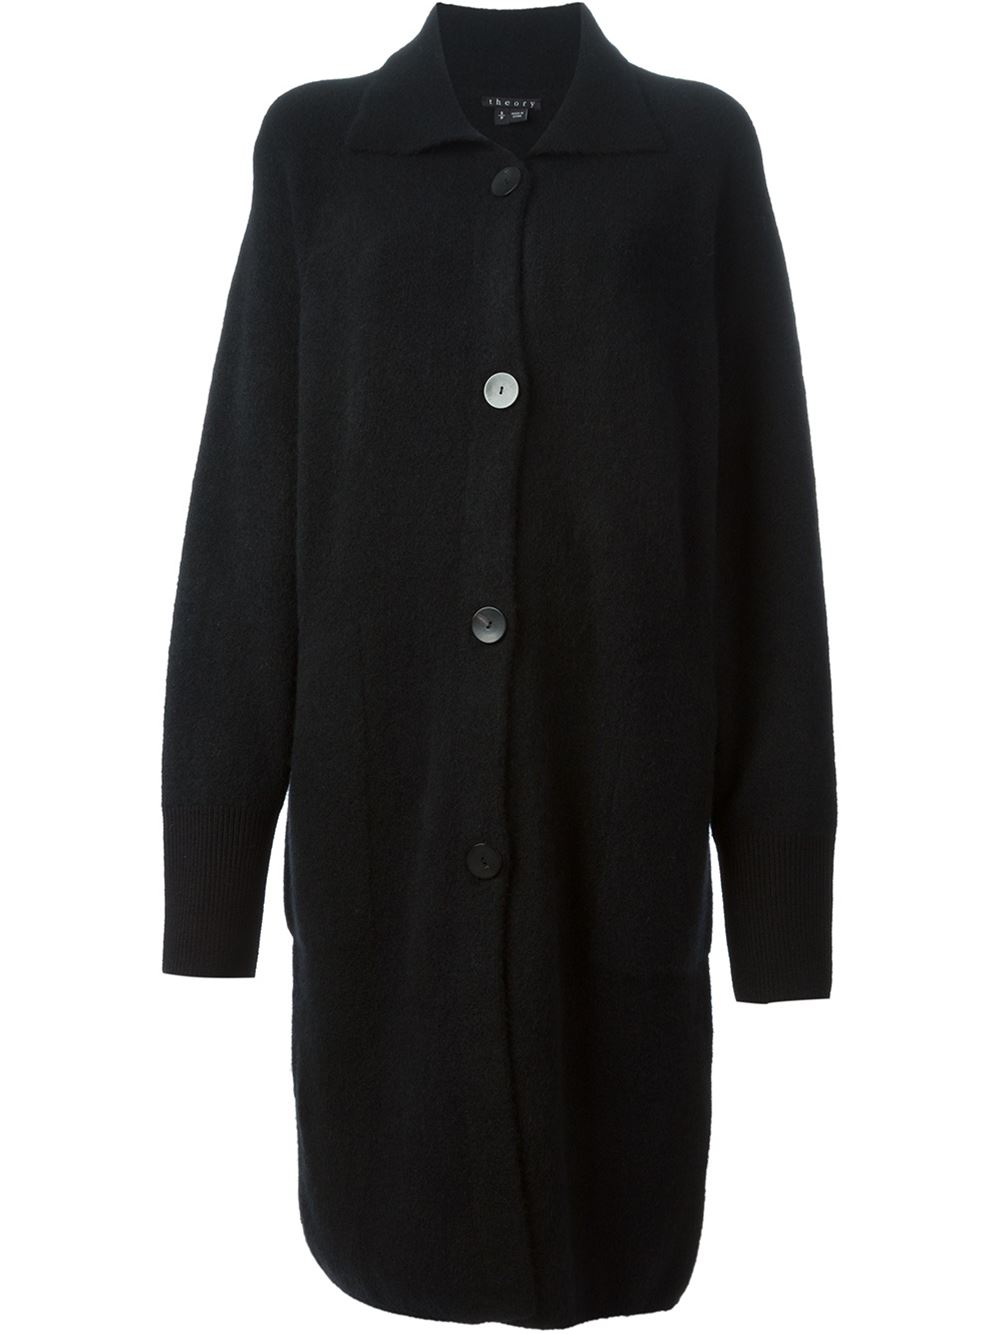 Lyst - Theory Long Button Down Cardigan in Black